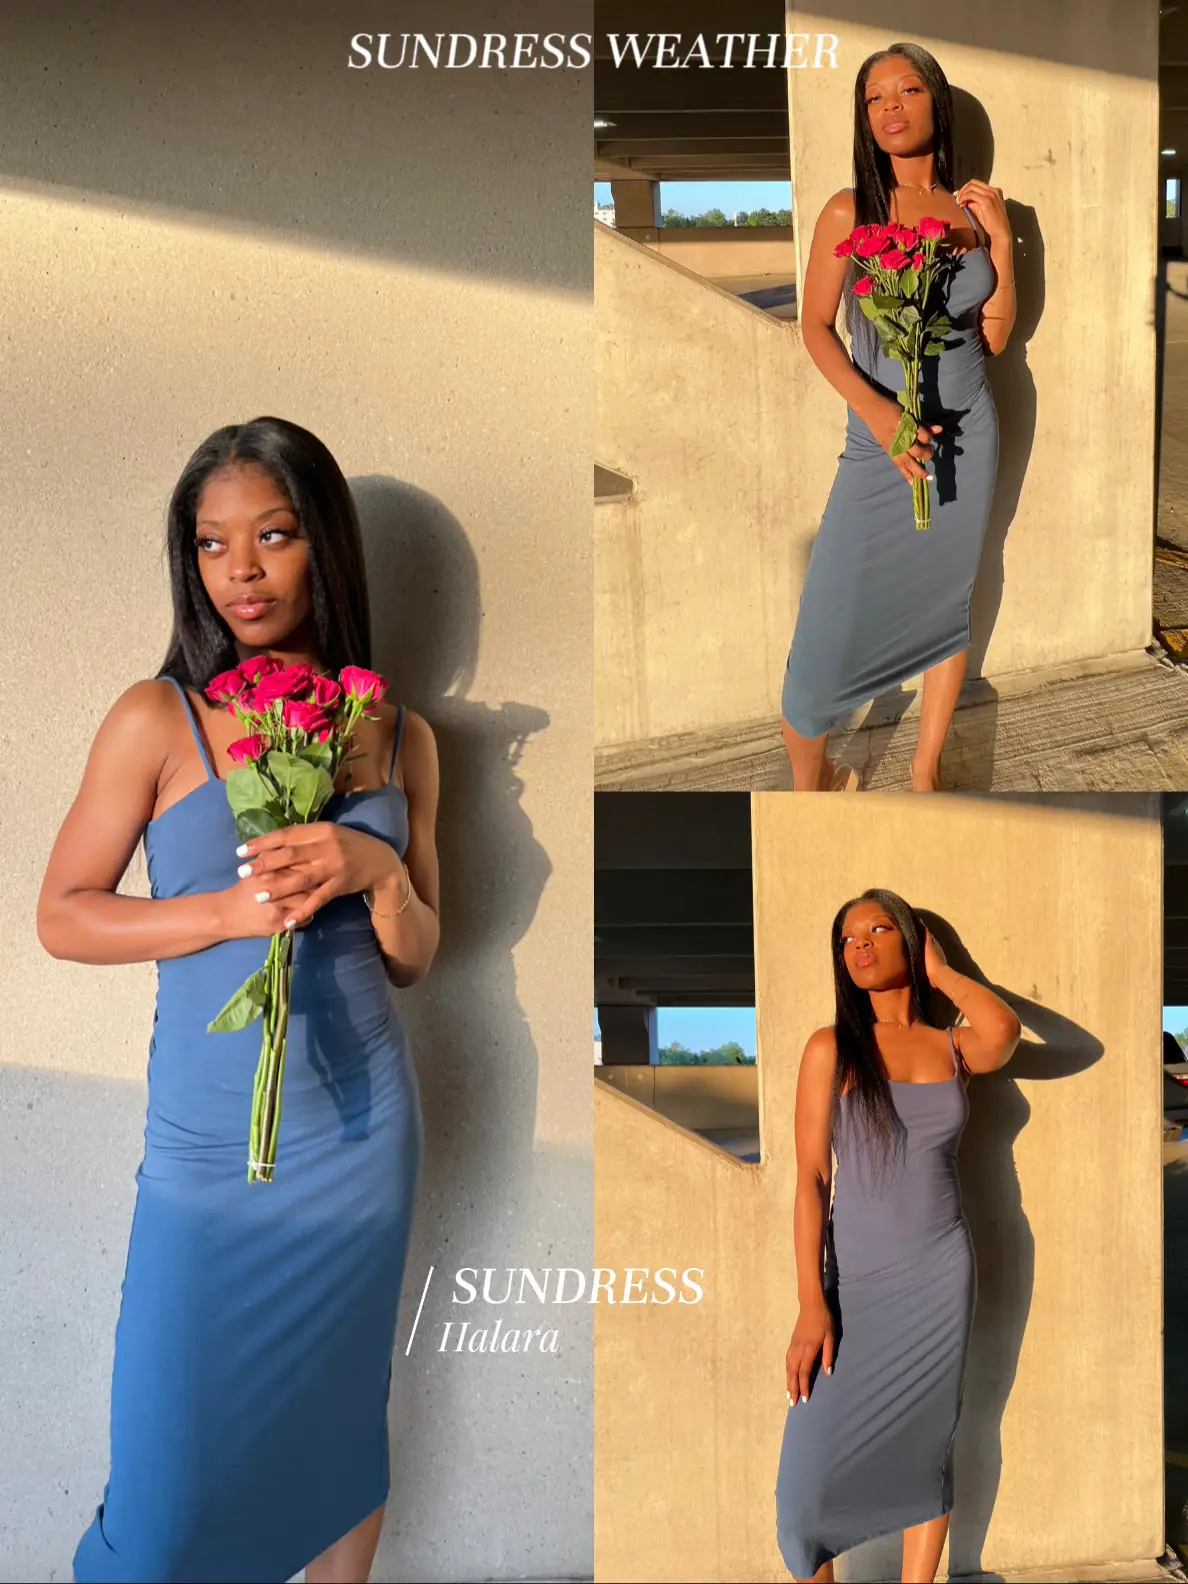 Cute dress for the summer💐🌞, Gallery posted by 𝐑𝐀𝐘𝐀𝐍𝐀 ✨